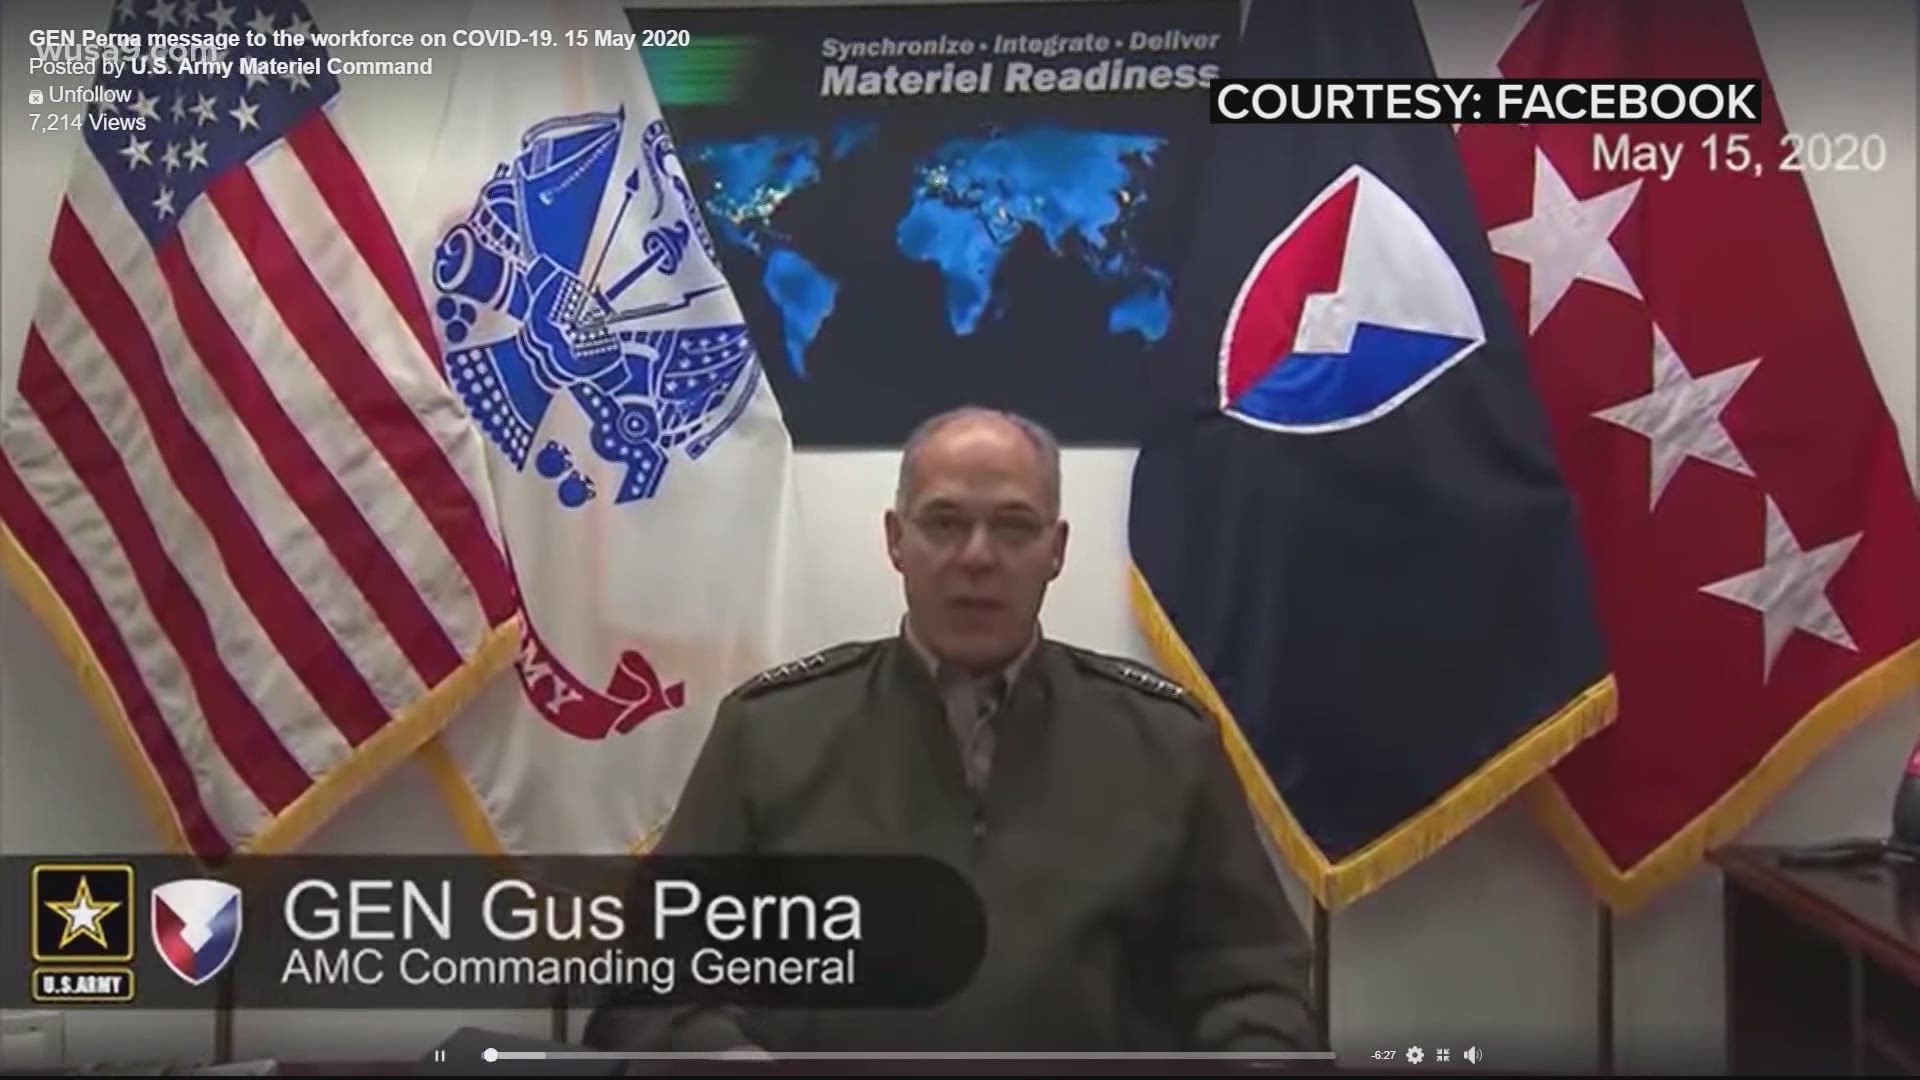 WUSA9 interviewed General Gus Perna in February for our military housing investigation. Now, we’re learning more about his new mission with Operation Warp Speed.